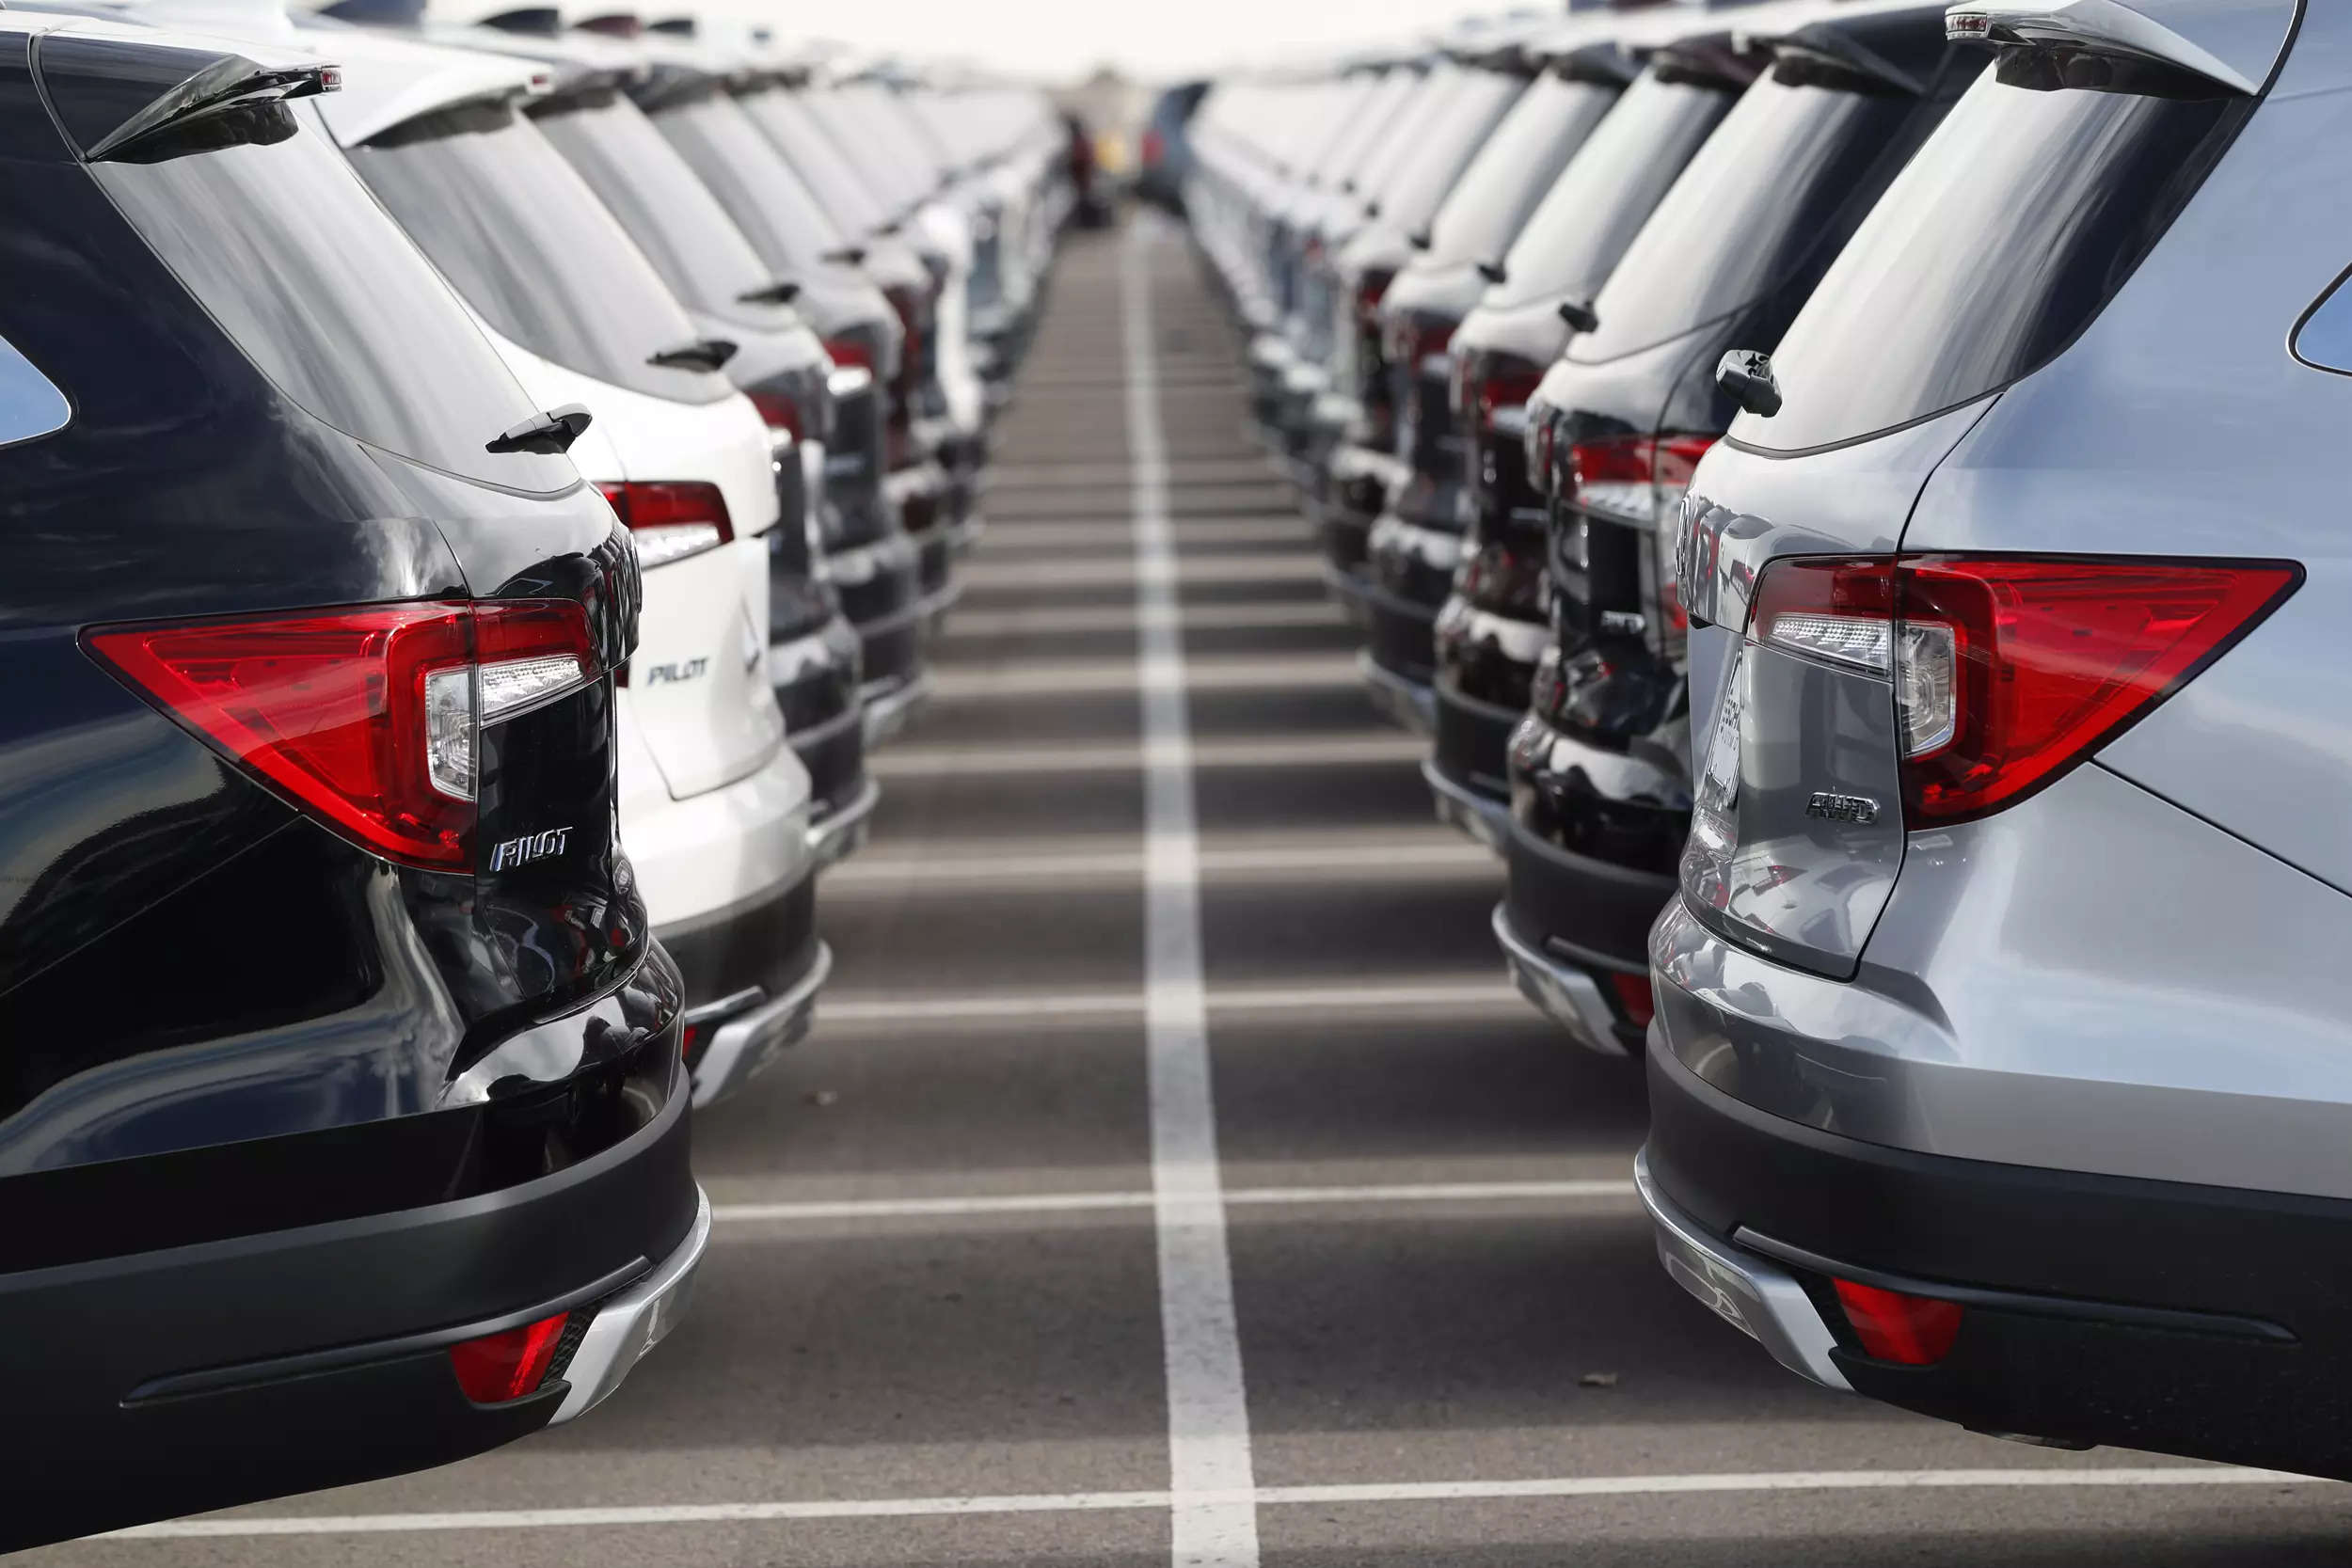 Passenger vehicle dealers had an inventory of 120,000 units, enough to meet 8-10 days of deliveries, at the end of October - less than half of what they typically have ahead of Dhanteras and Diwali.